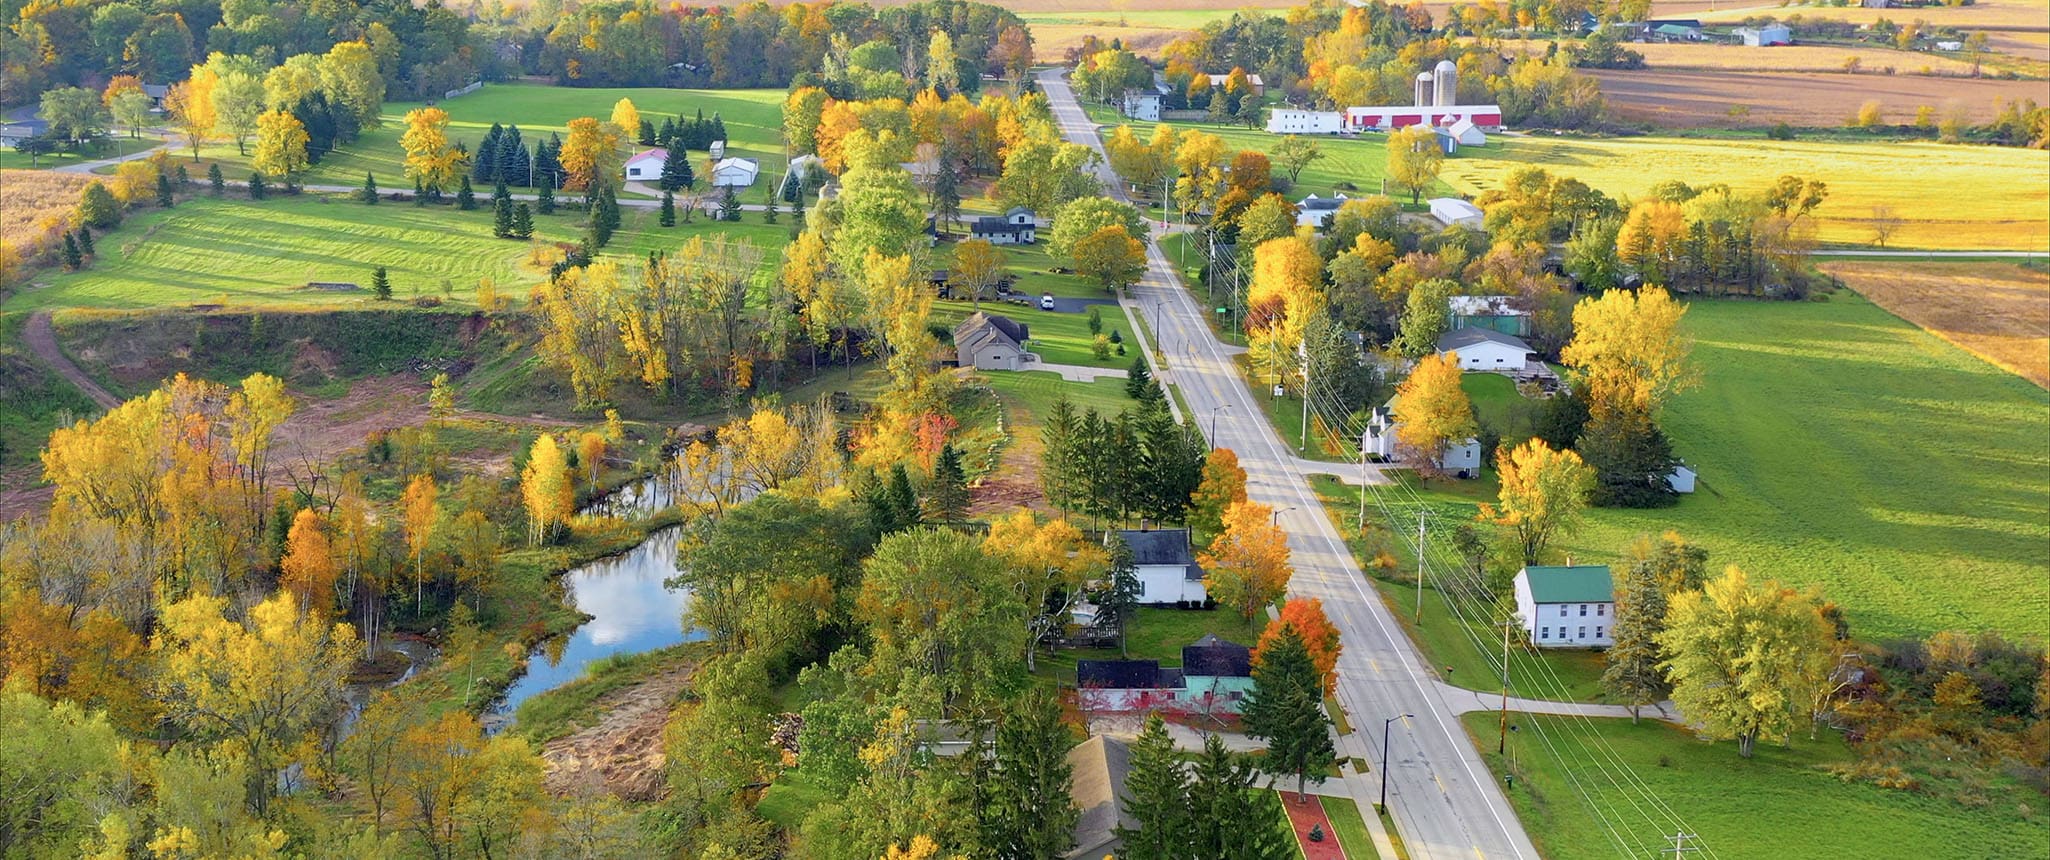 Scenic Small Town Nestled Amid Fertile Valley In Beautiful Rural Wisconsin.